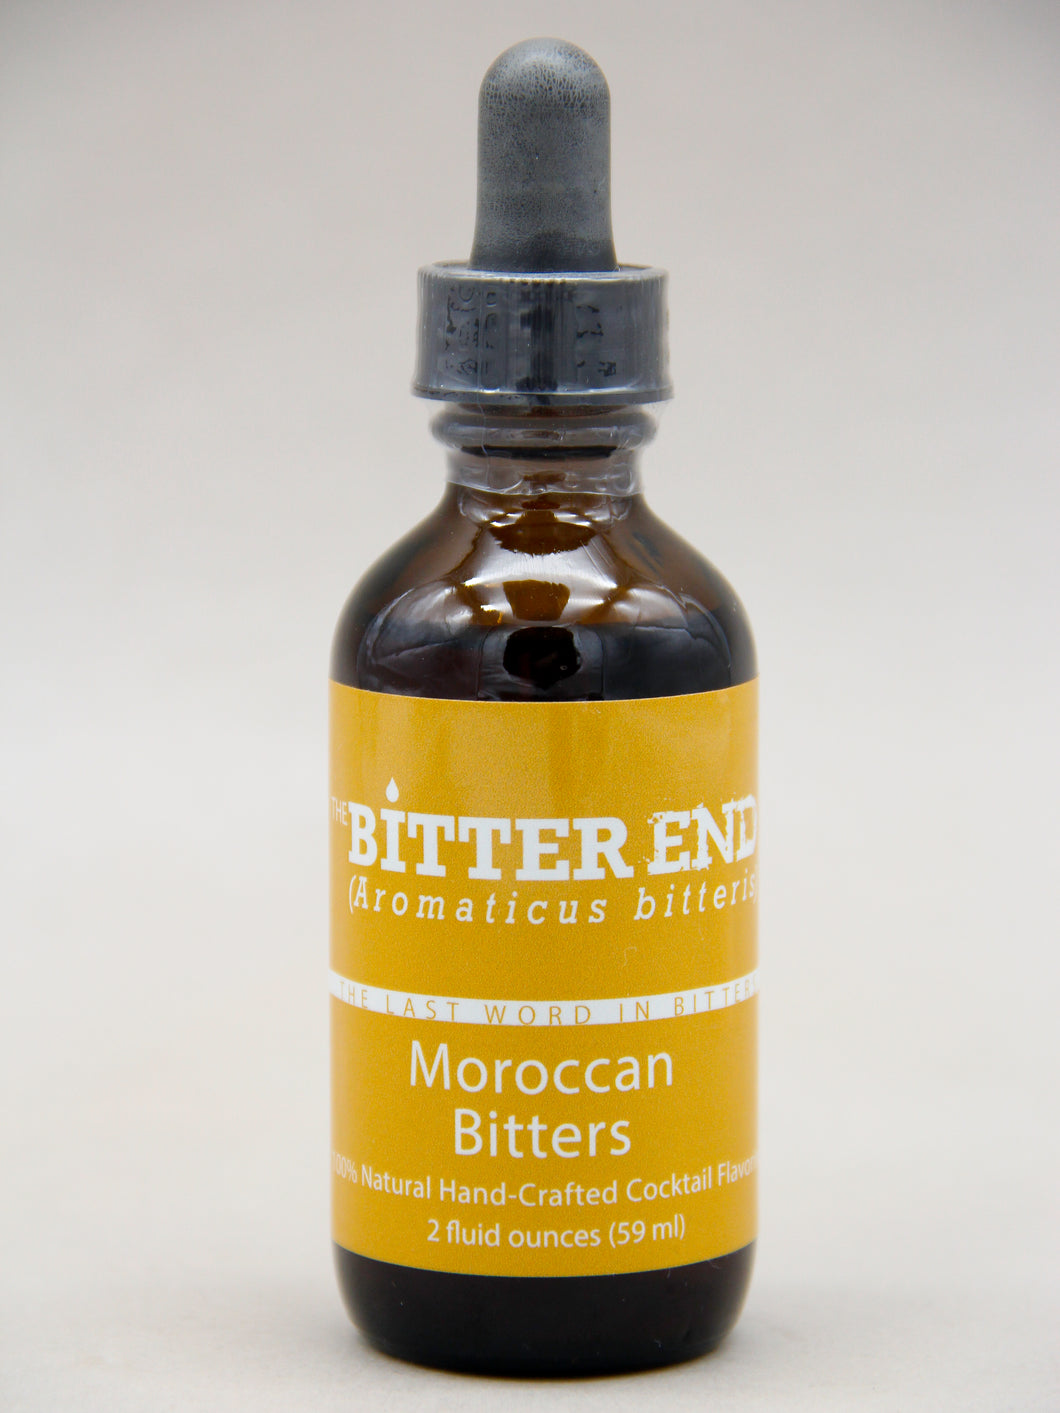 Bitter End Moroccan Bitters (45%, 5.9cl)